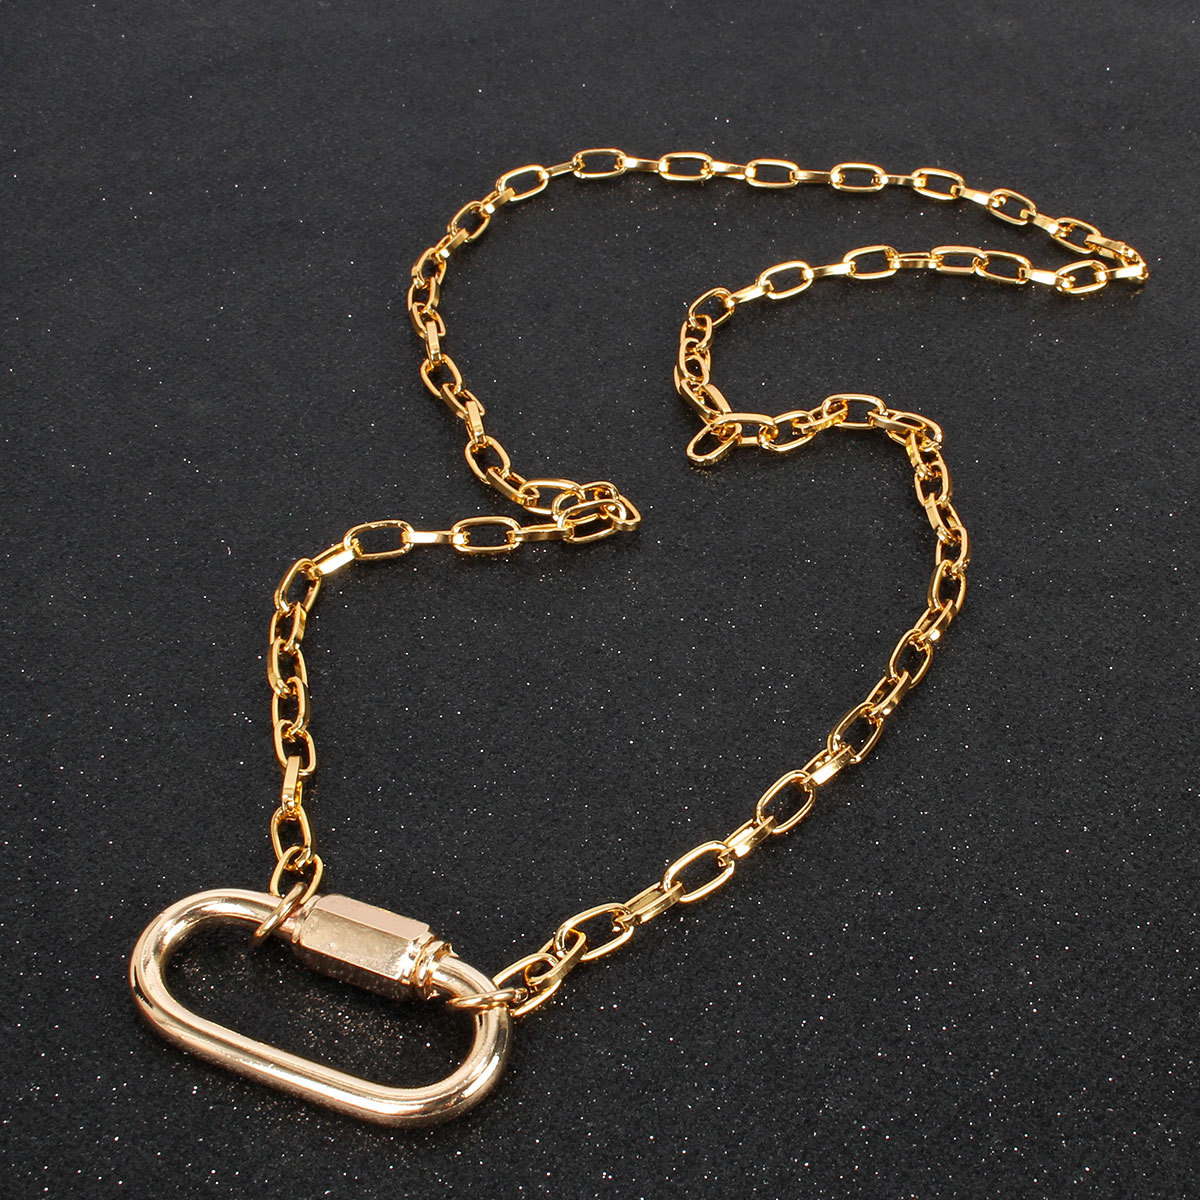 Women Necklace Stainless steel Gold Color Strong Shackle U Carabiner Snap Hook Charm Climbing Buckle Horseshoe Clasp Long Choker